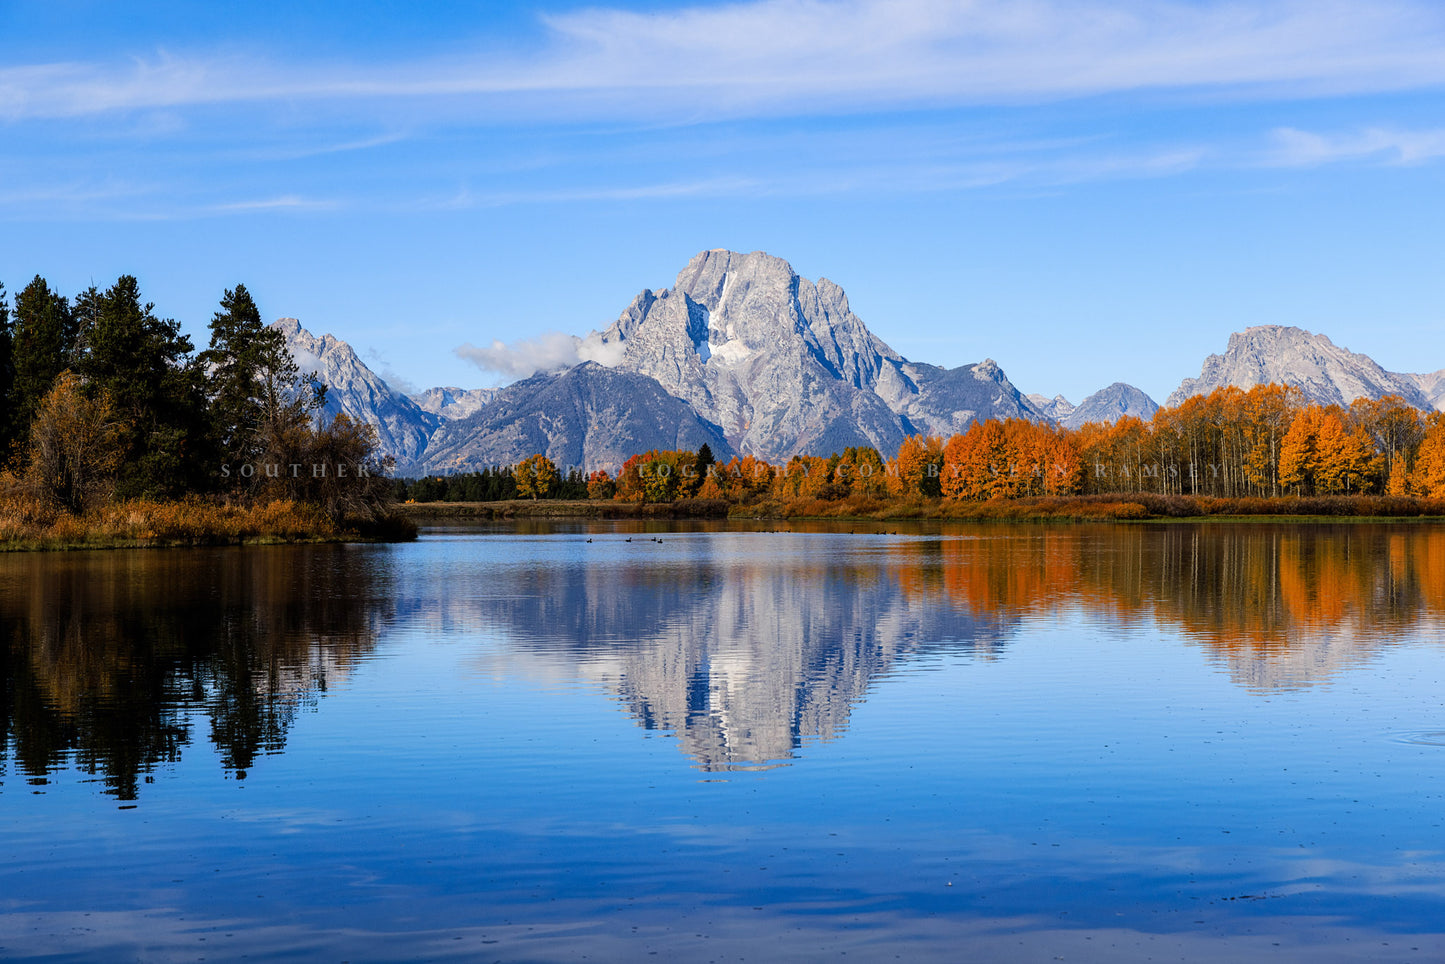 Rocky Mountain photography print of Mount Moran reflecting off the waters of the Snake River on an autumn day in Grand Teton National Park, Wyoming by Sean Ramsey of Southern Plains Photography.